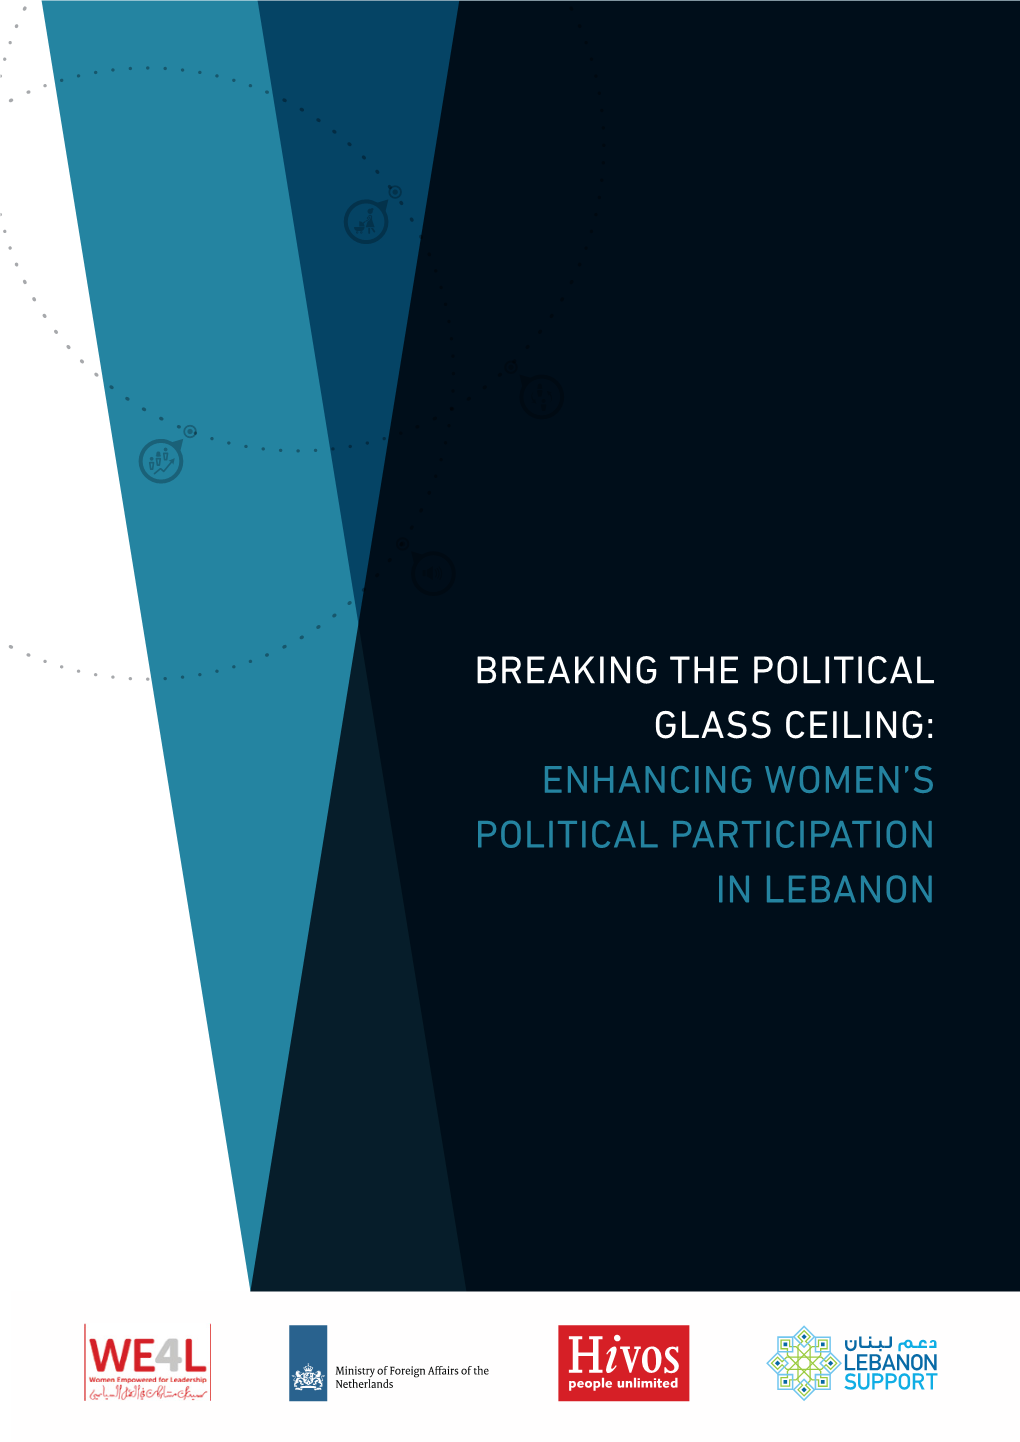 Breaking the Political Glass Ceiling: Enhancing Women's